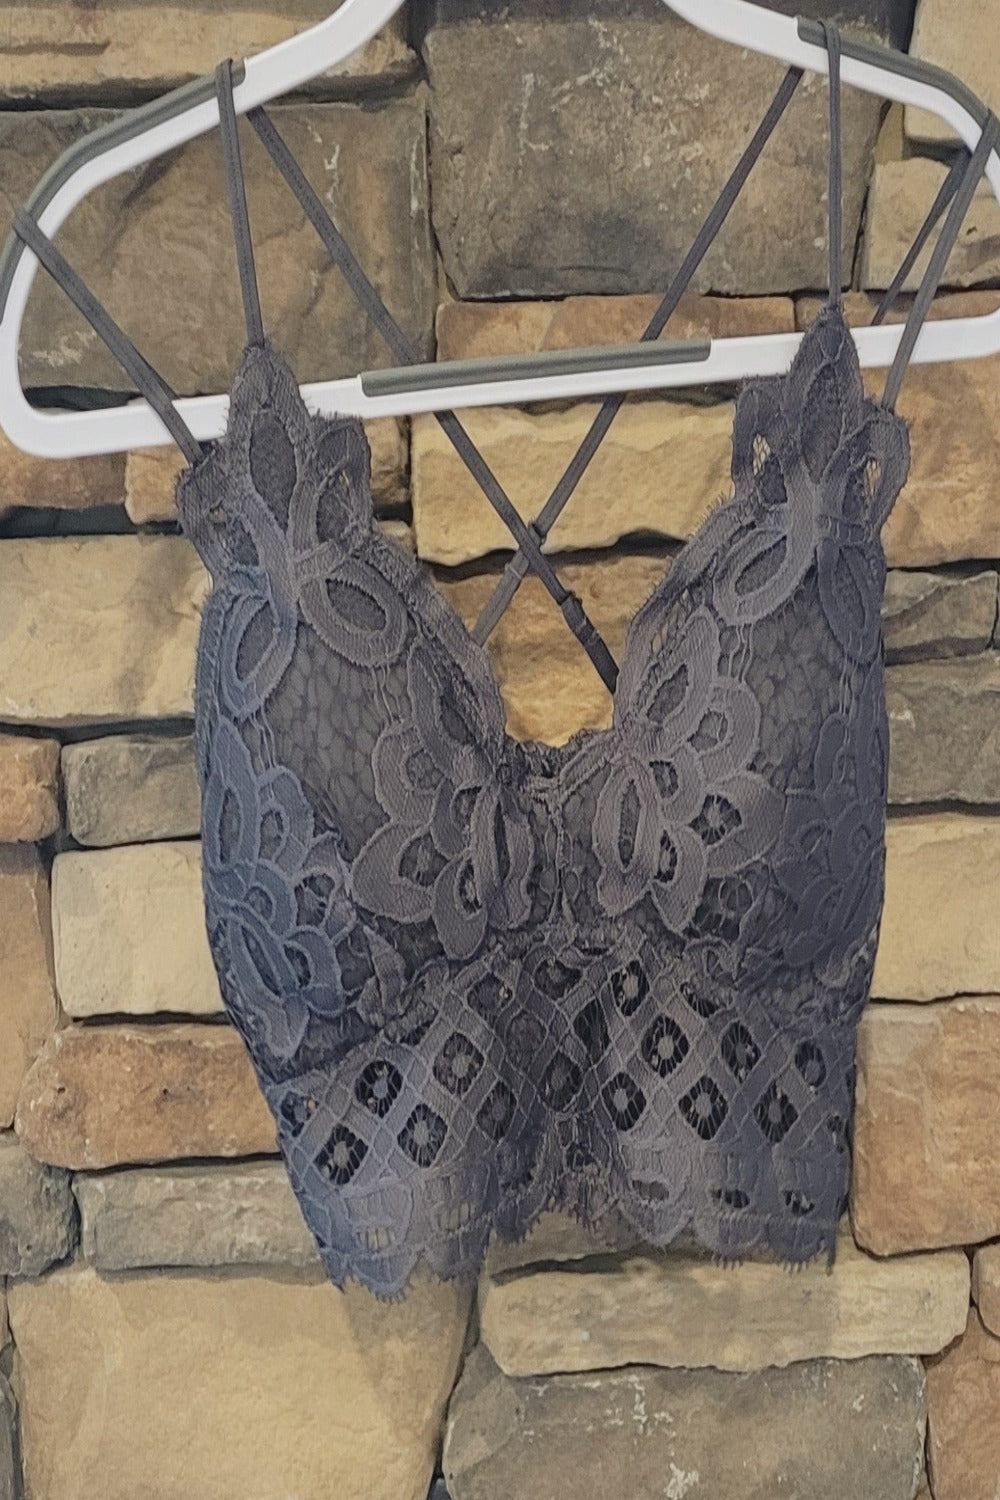 Padded Bralette in Charcoal Plus Size by Anemone